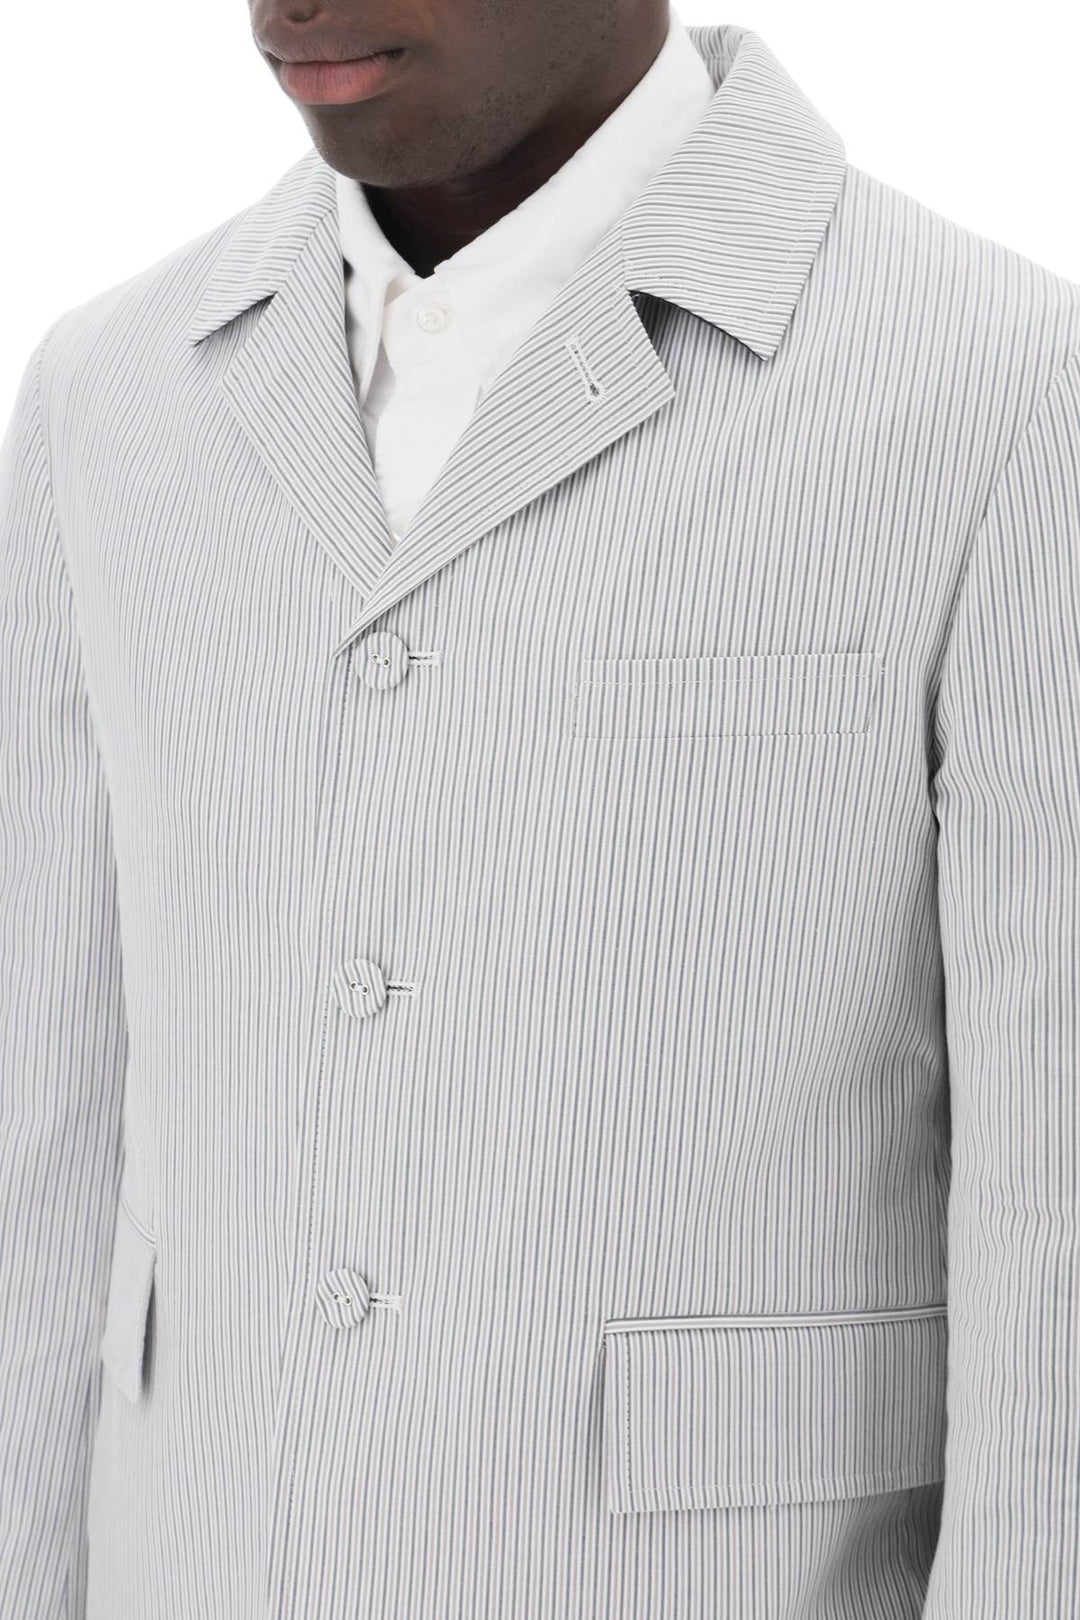 Thom Browne Striped Deconstructed Jacket   Bianco